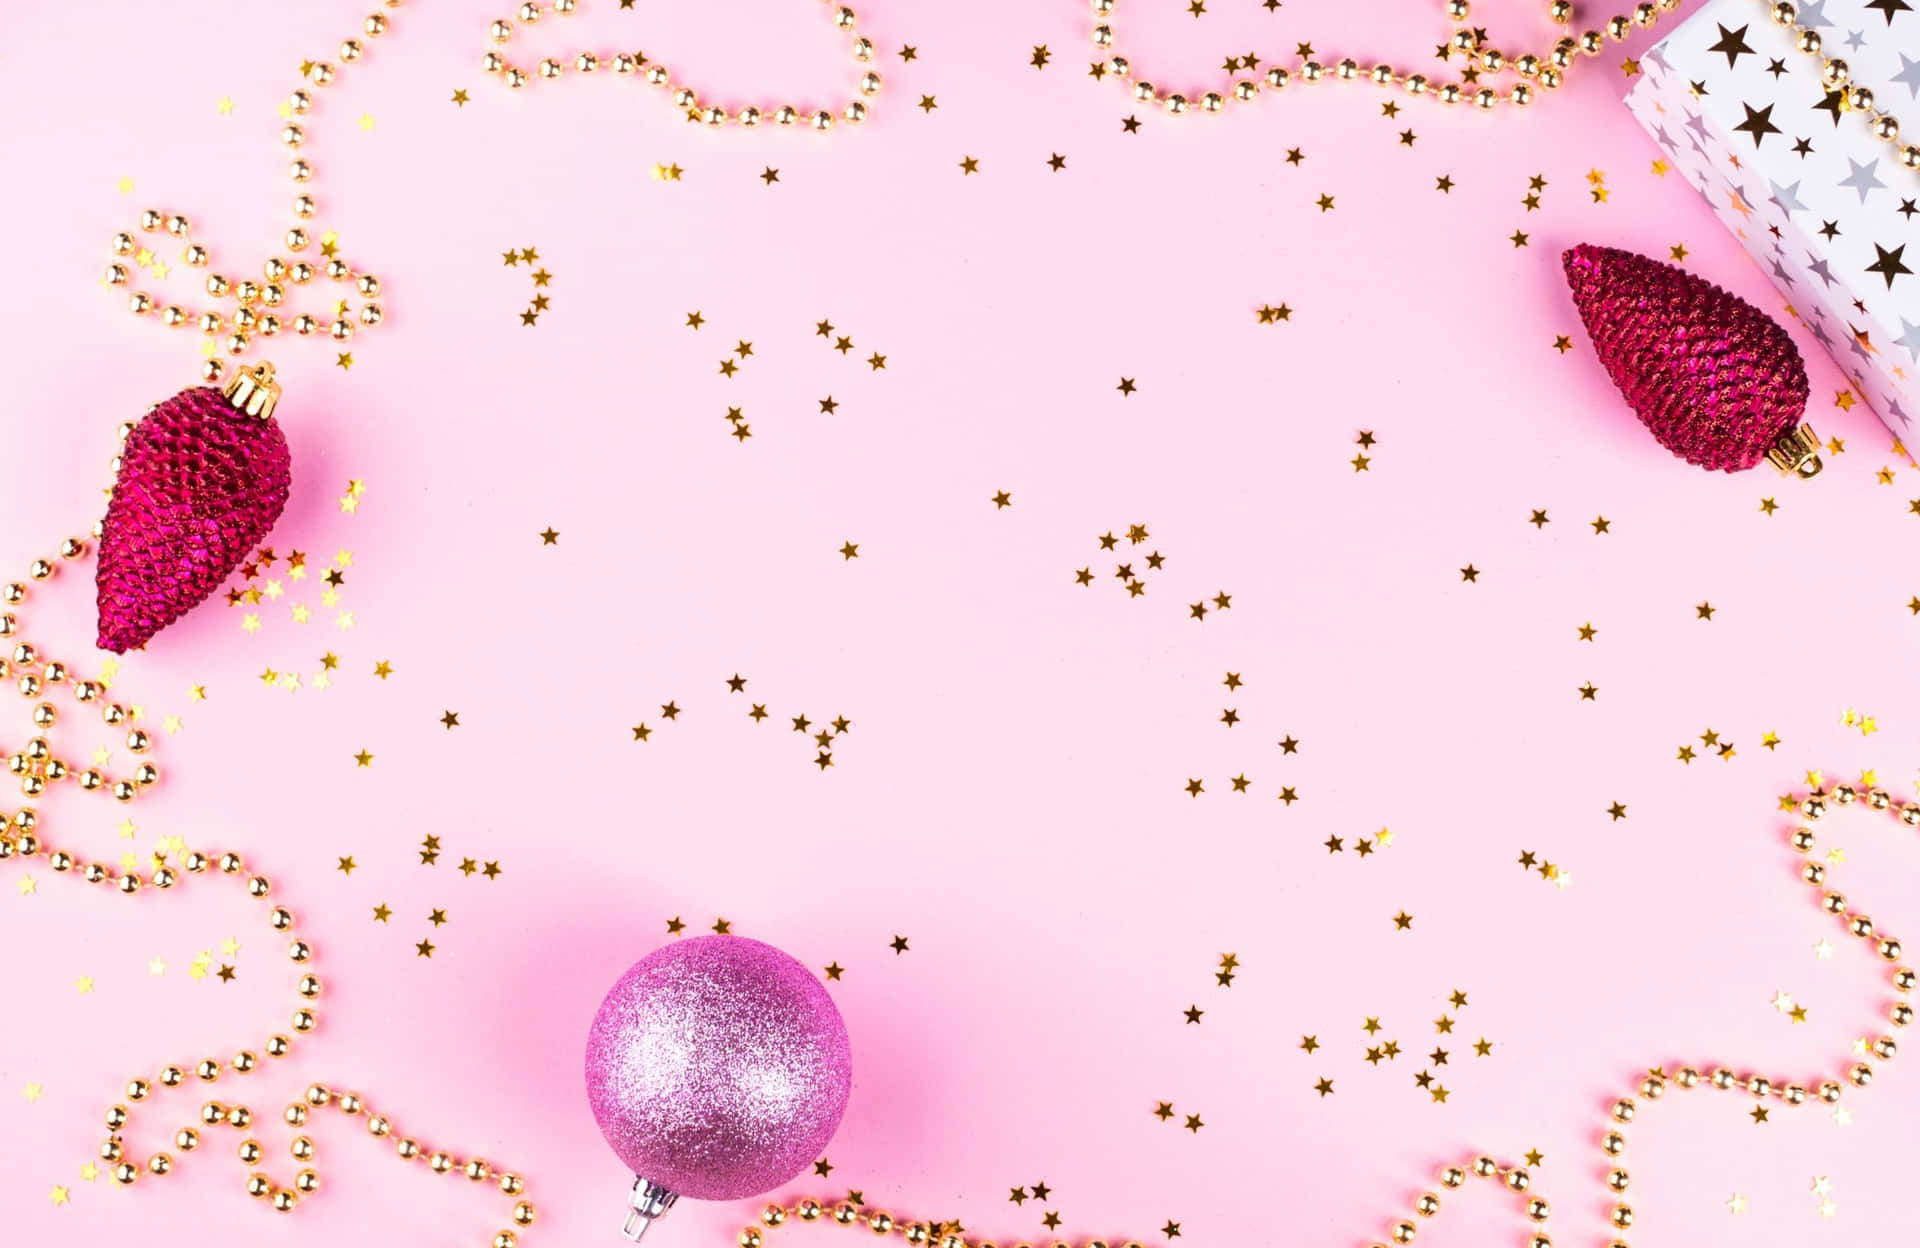 Enjoy the festive spirit of the Holiday season with this beautiful pink Christmas background